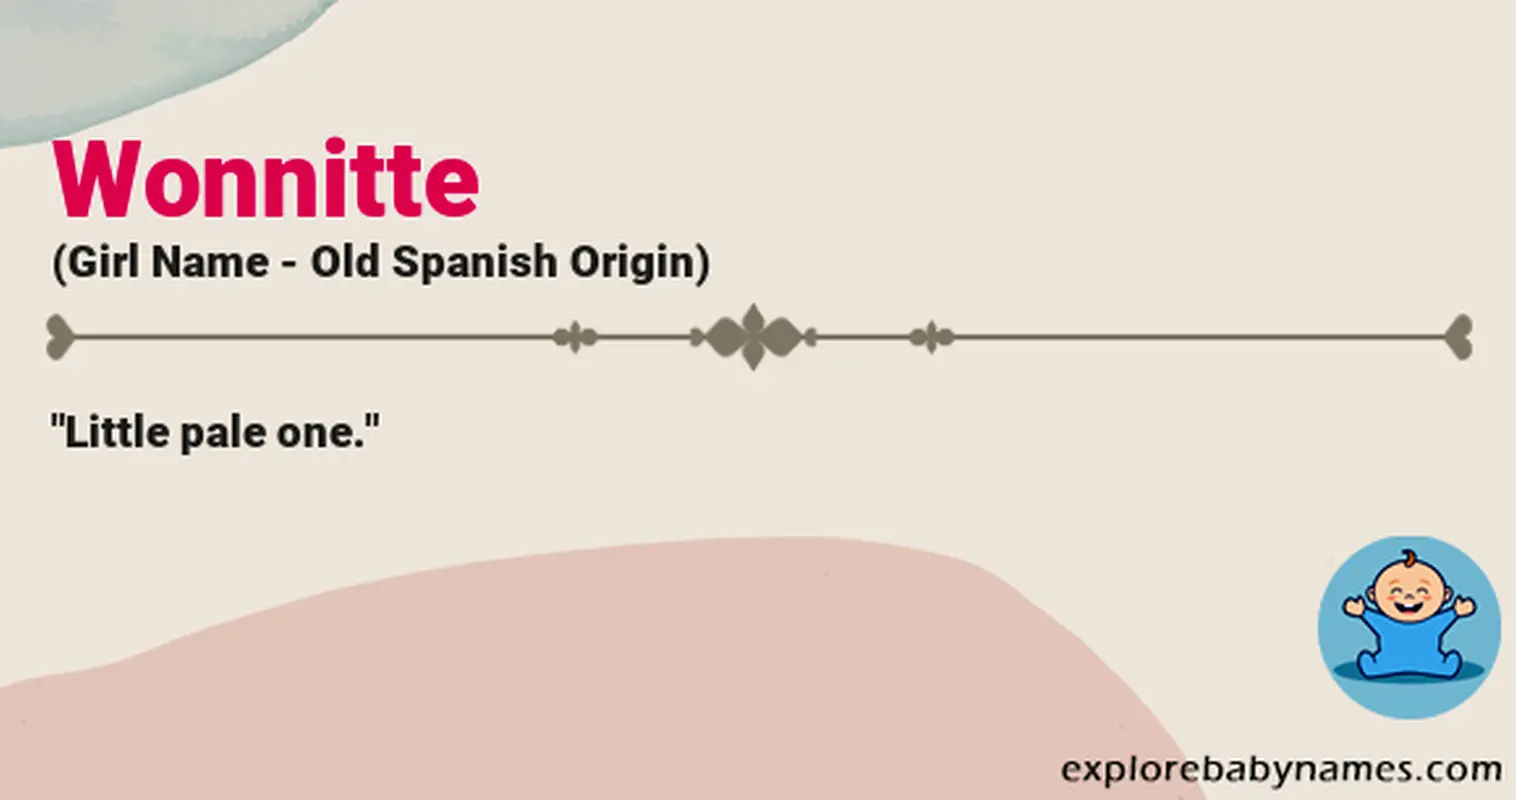 Meaning of Wonnitte